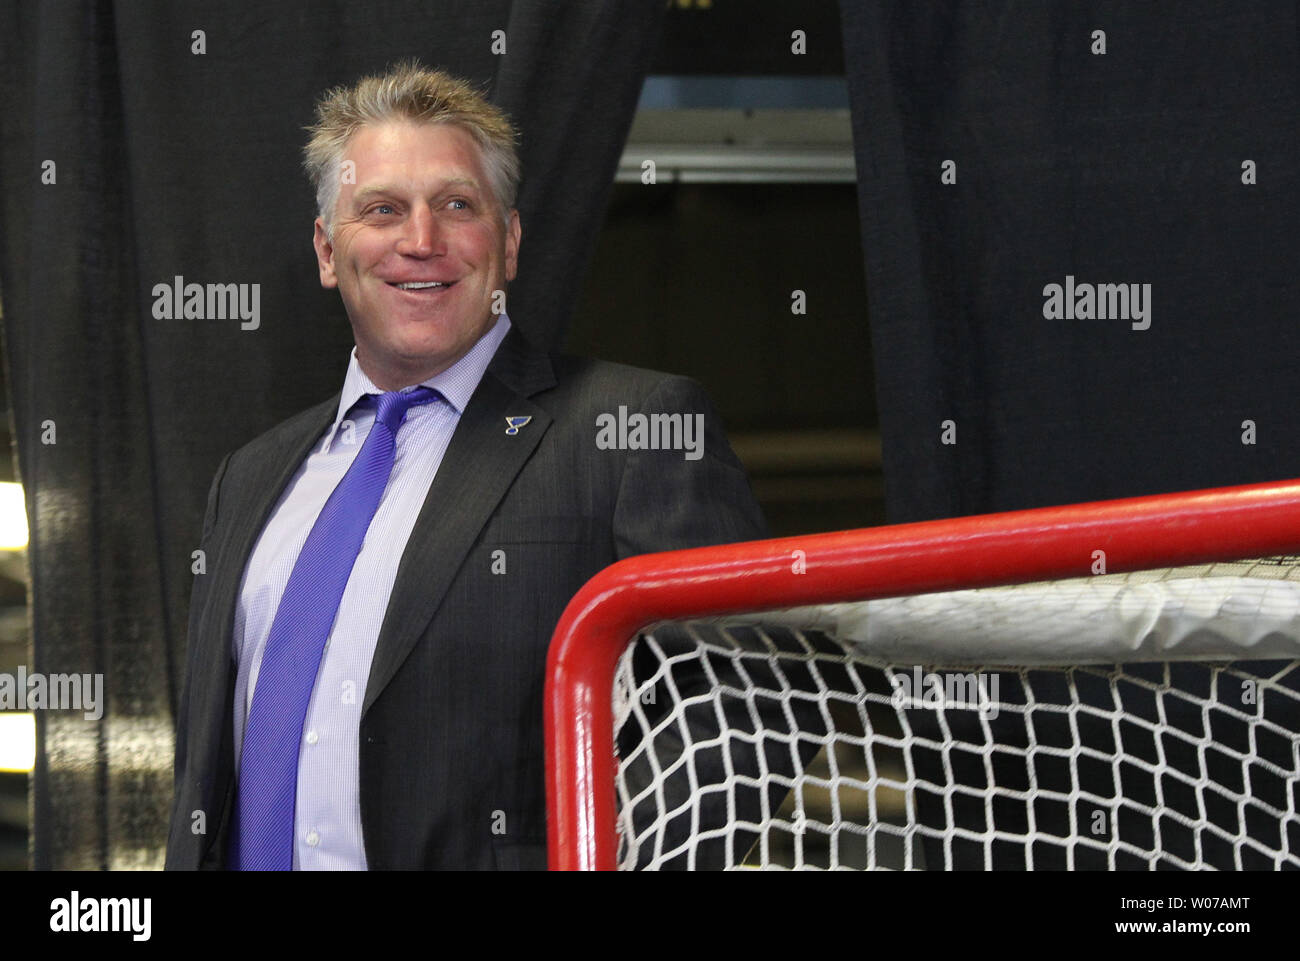 Ex-Detroit Red Wings champ Brett Hull up for laughs to help charity